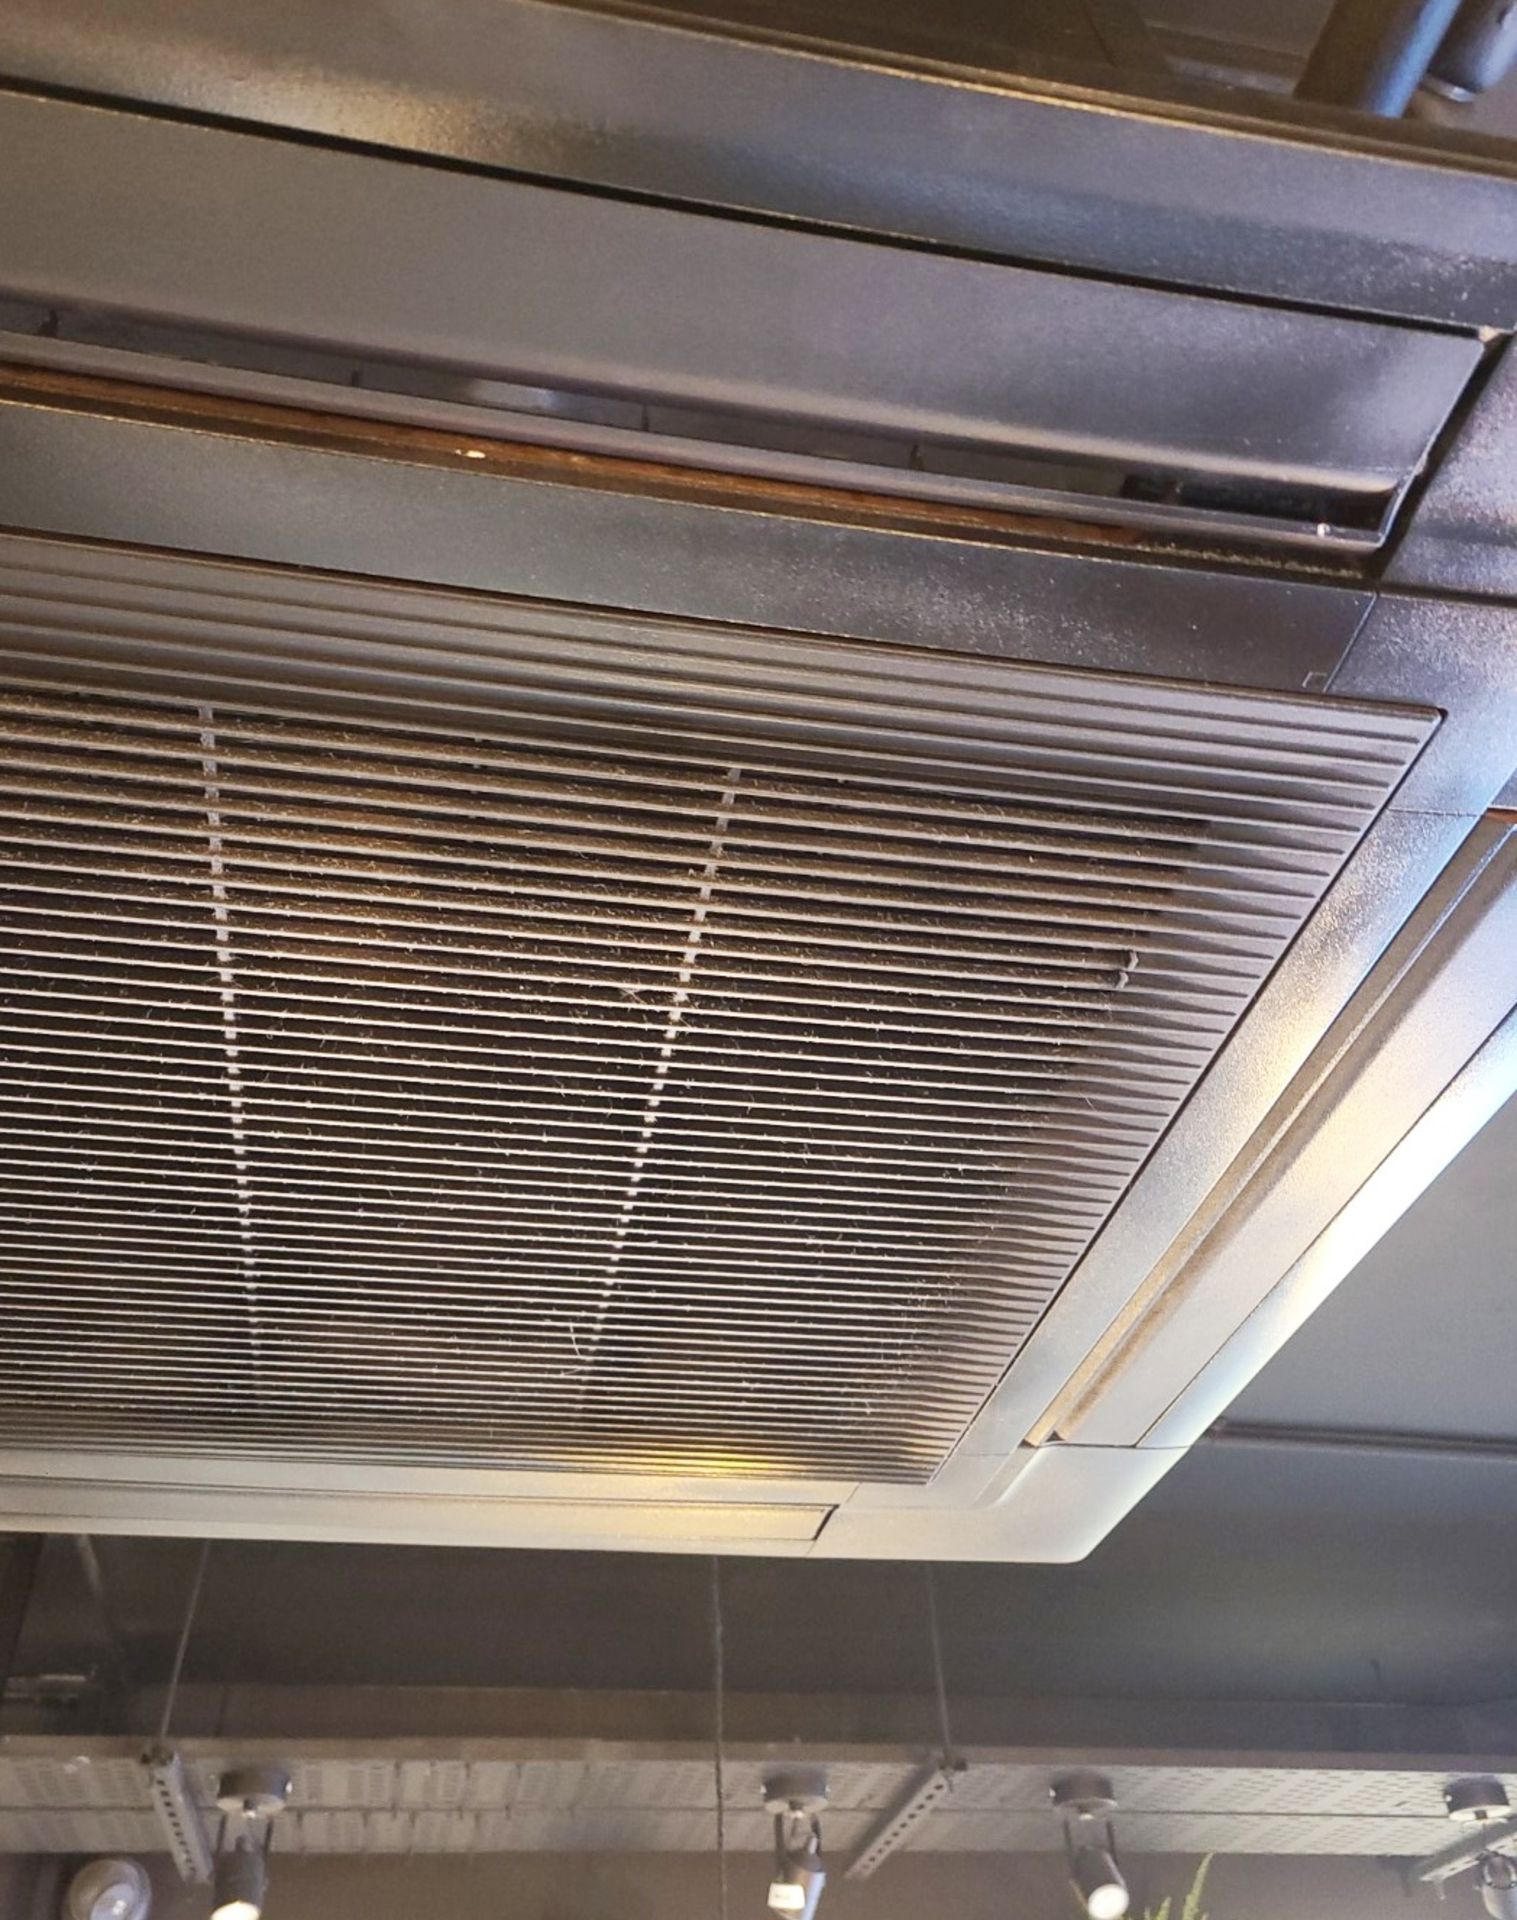 2 x PANASONIC 4 Way Cassette Fitted To The Ceiling Air Conditioner With 4 Way Directional Air Flow - Image 4 of 13